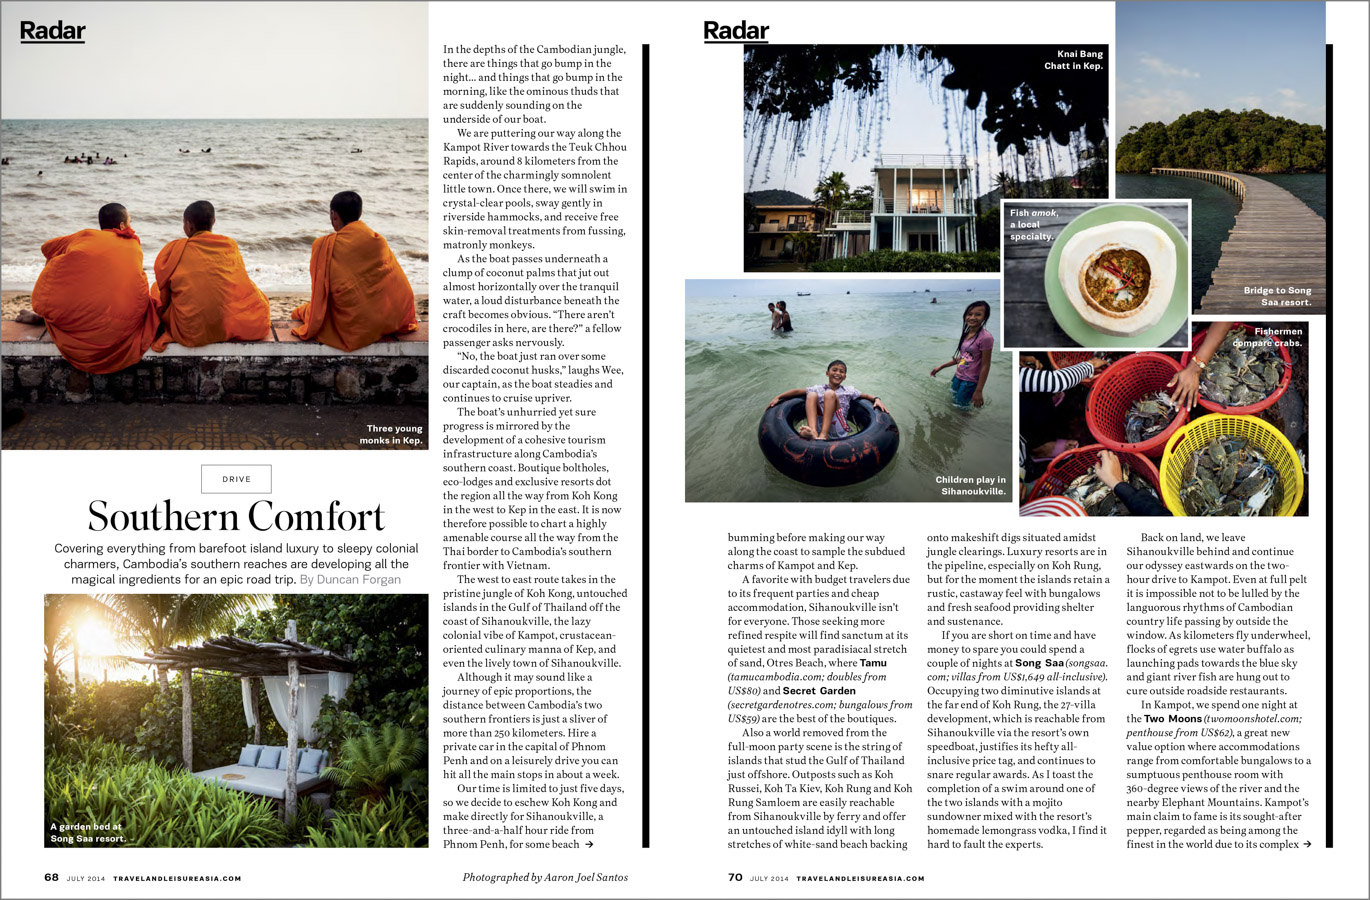 A travel feature on southern Cambodia.